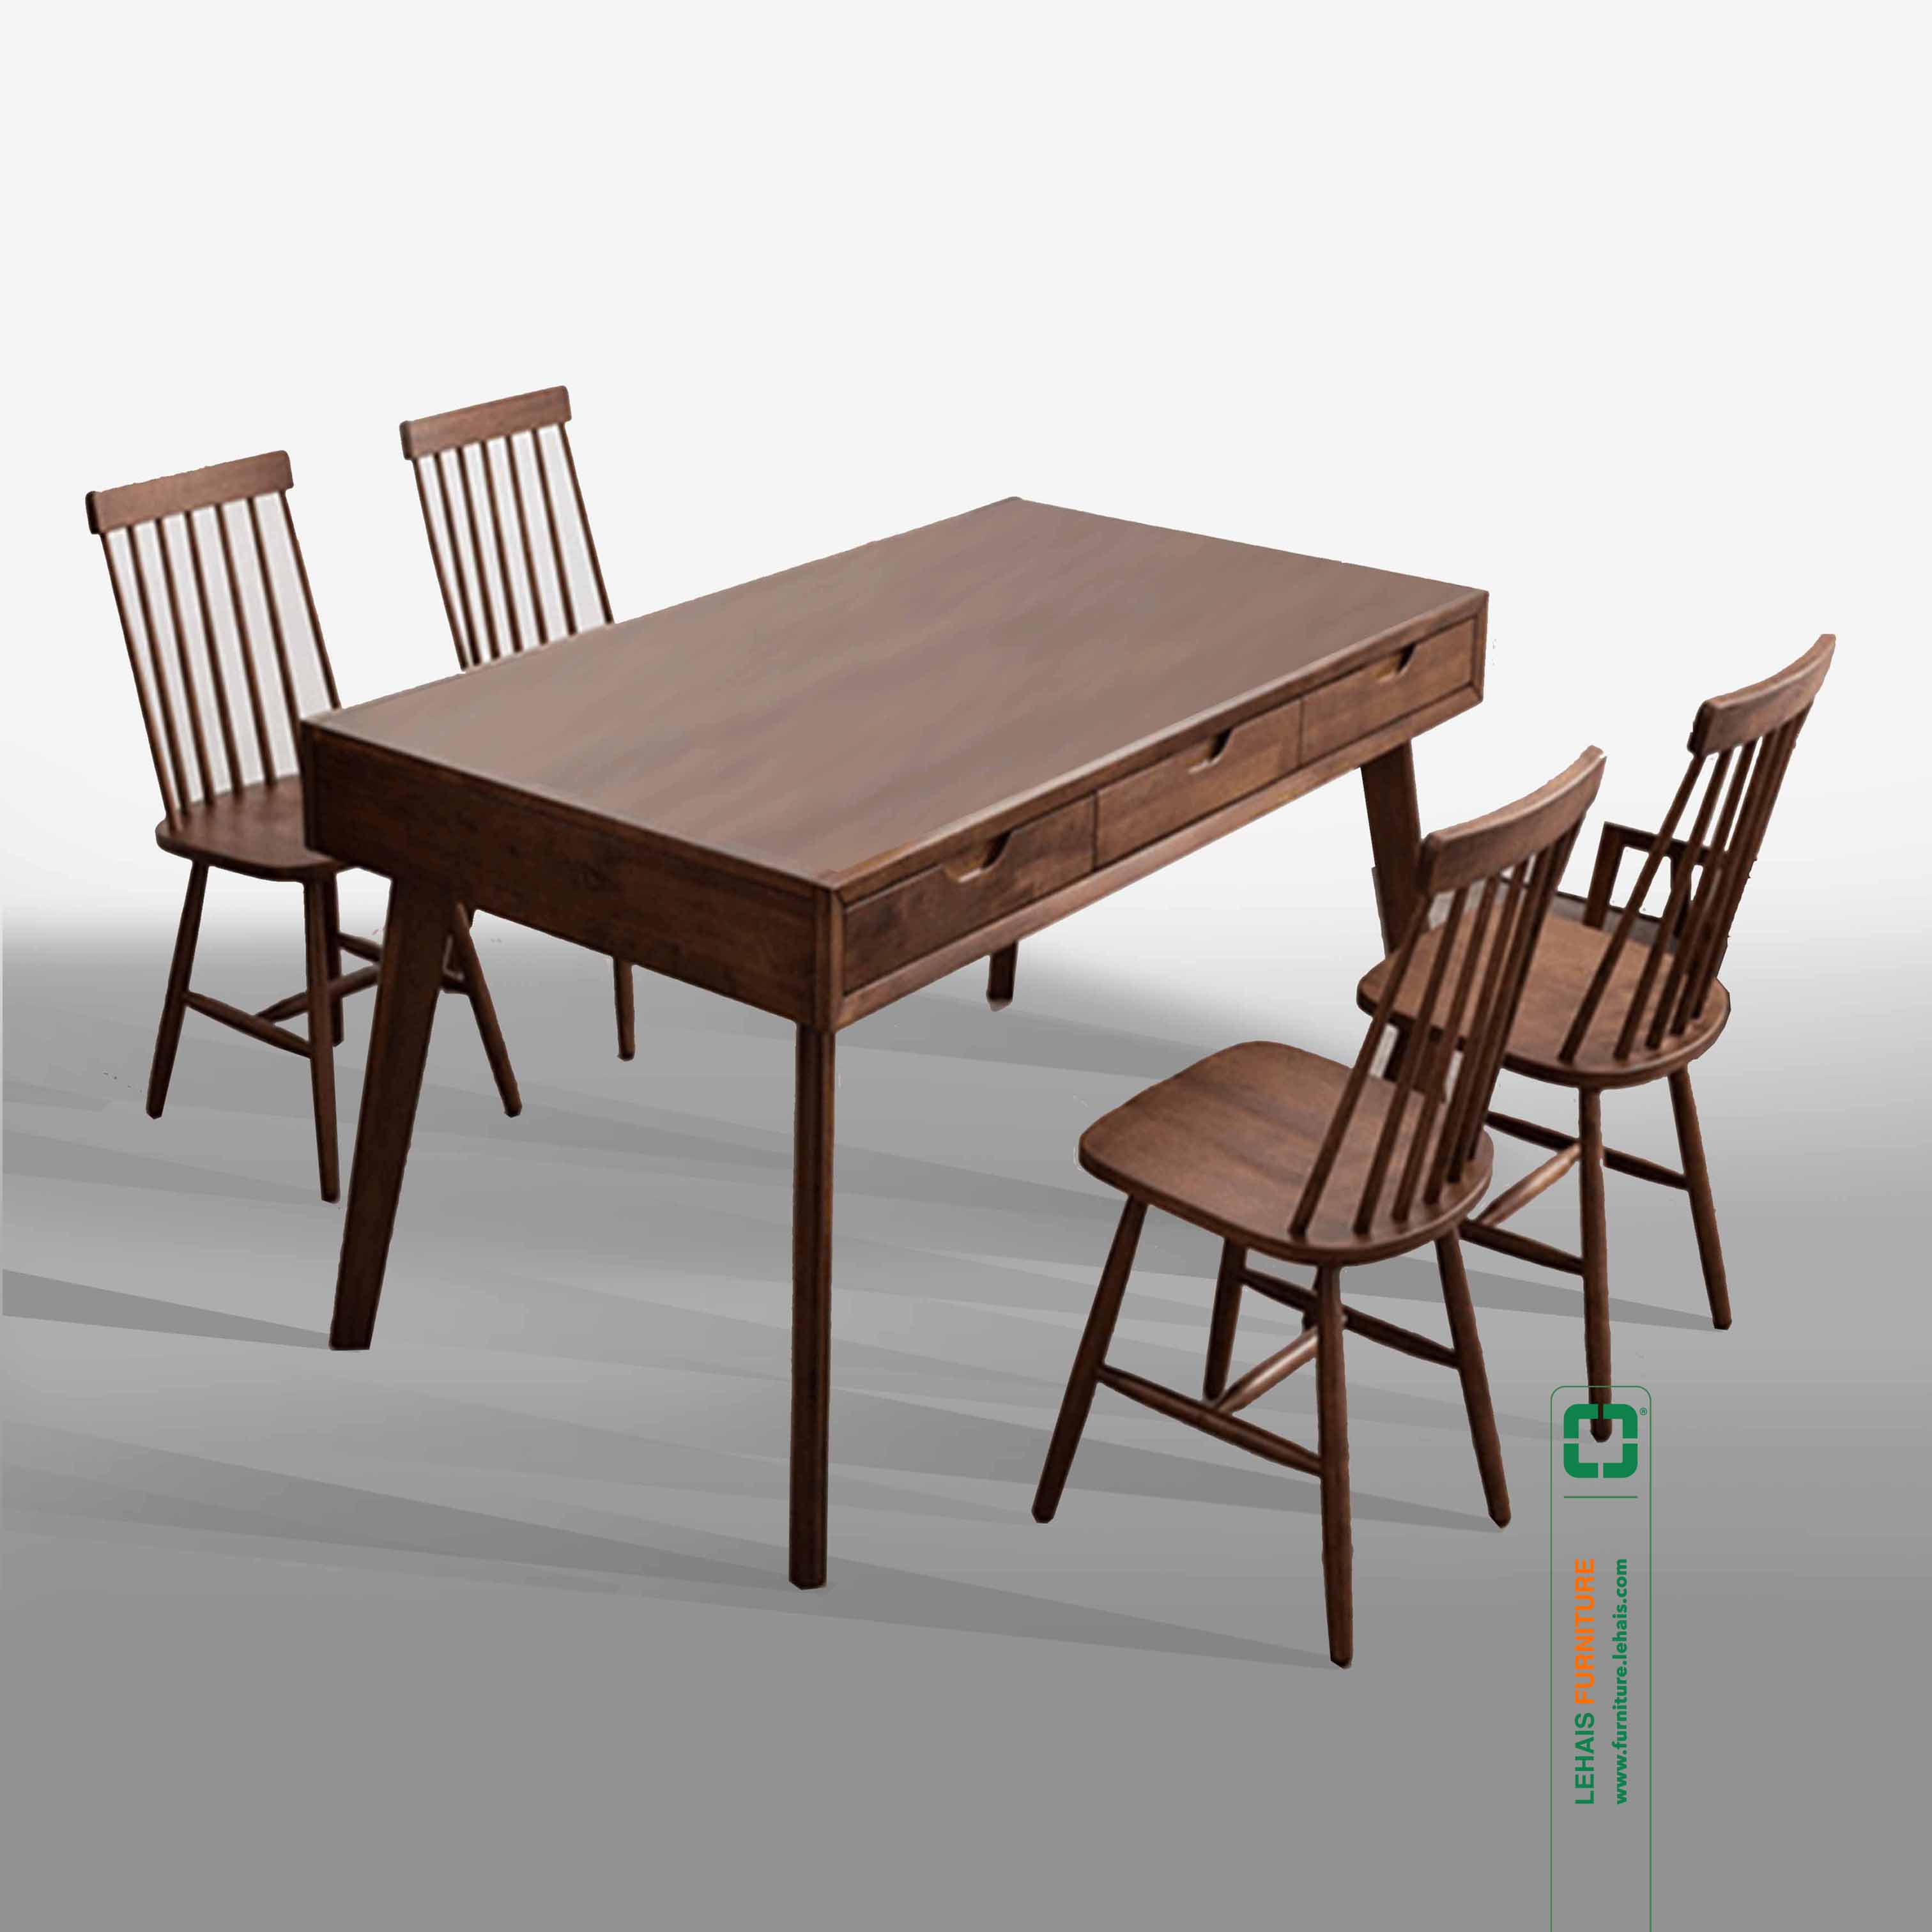 Rectangle table and chairs Pinnstol - BG6LHFU